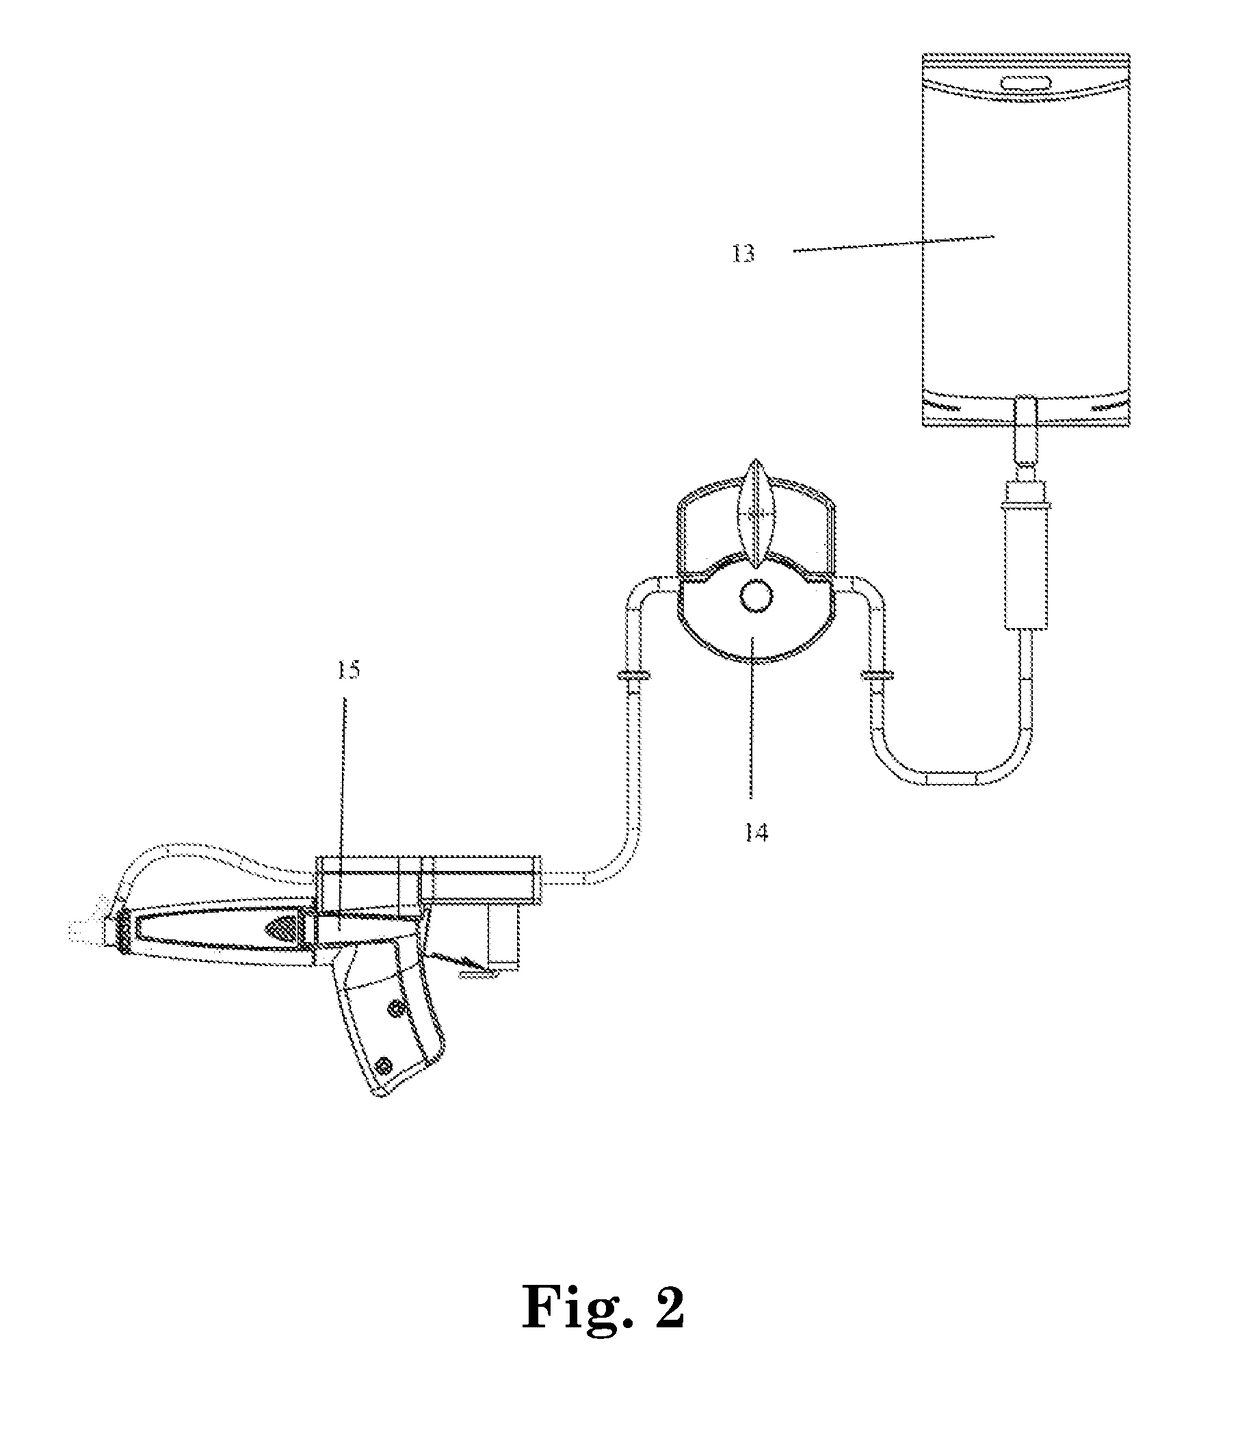 Thermal control of liquids for transcutaneous delivery